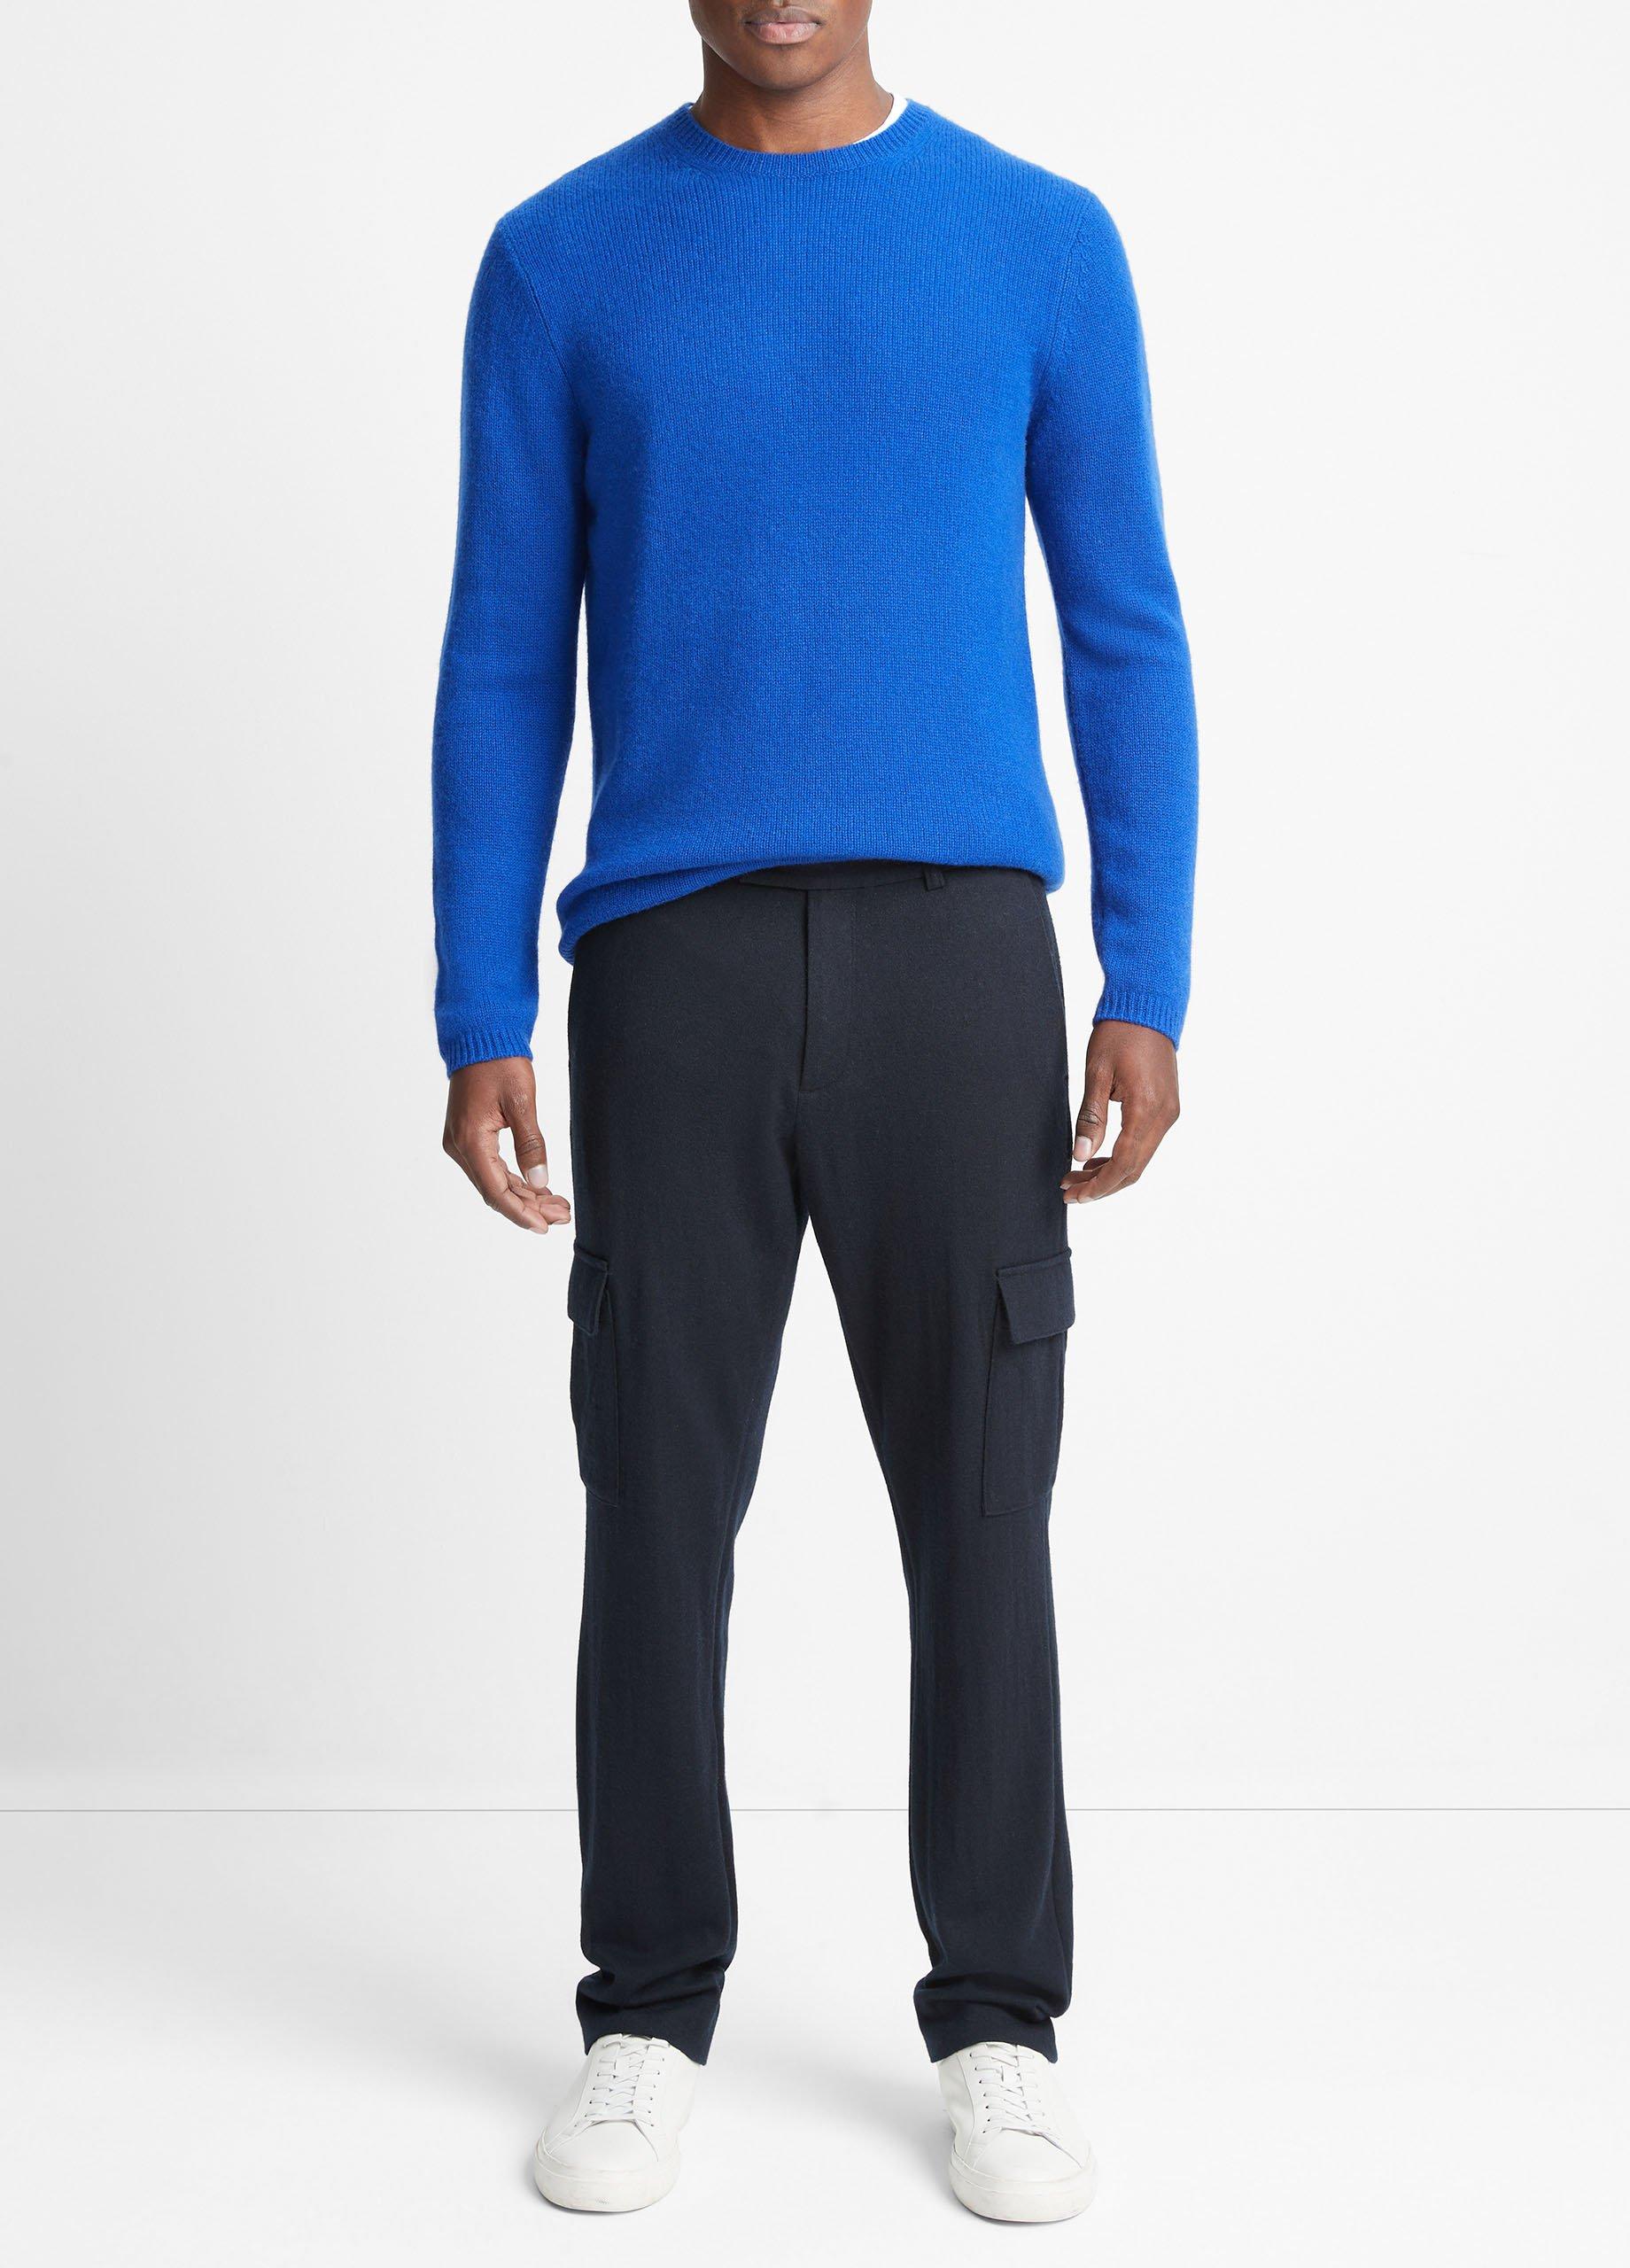 Cashmere Crew Neck Sweater in Vince Products Men